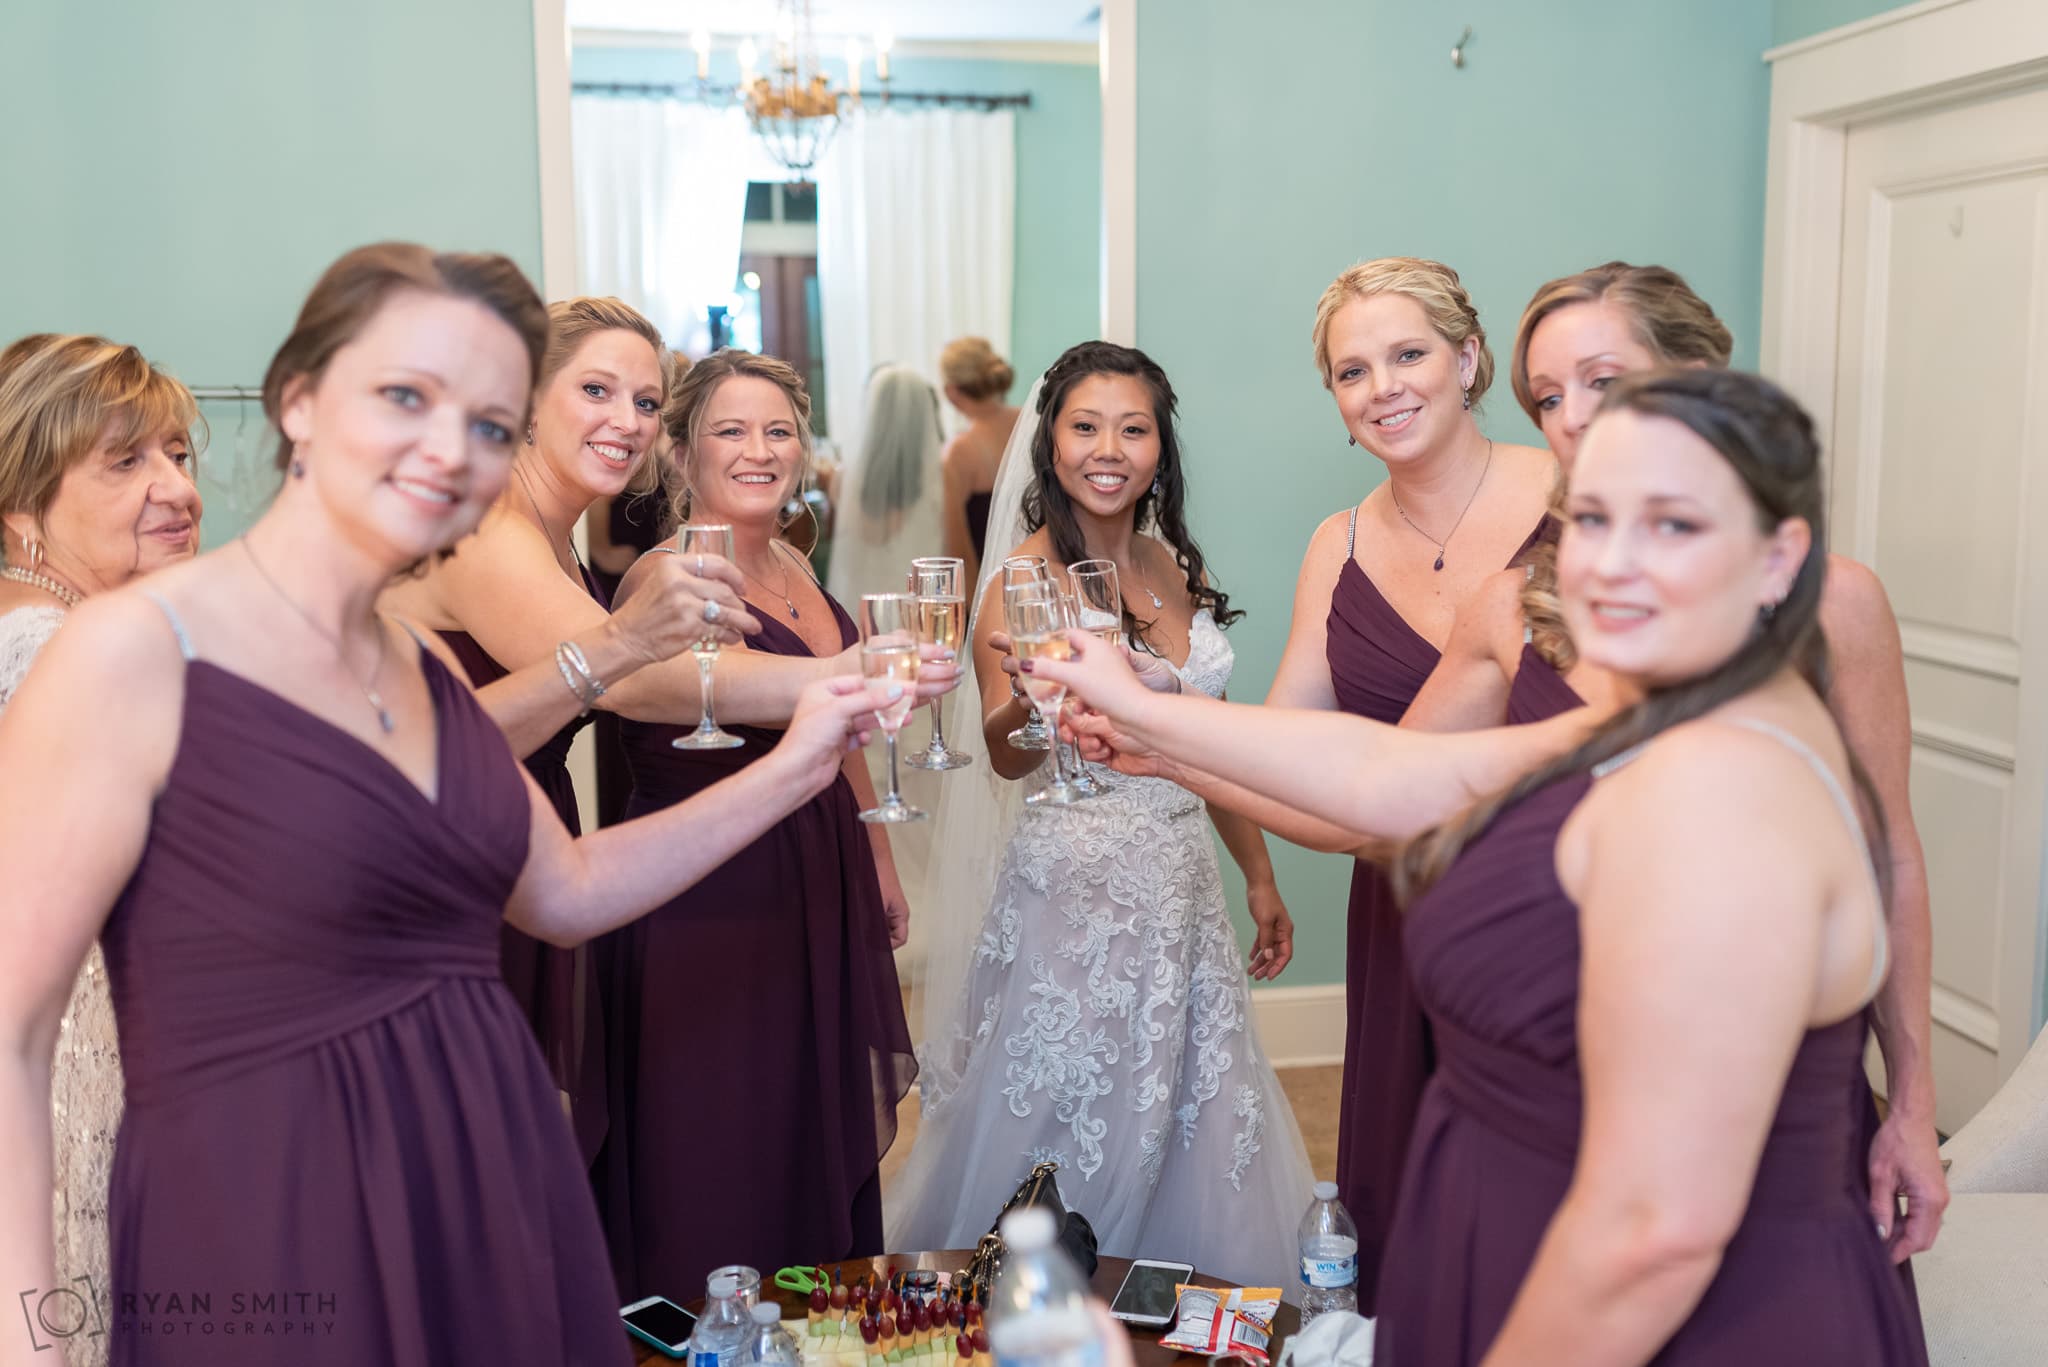 Bride and bridesmaids toasting before the wedding 21 Main Events at North Beach